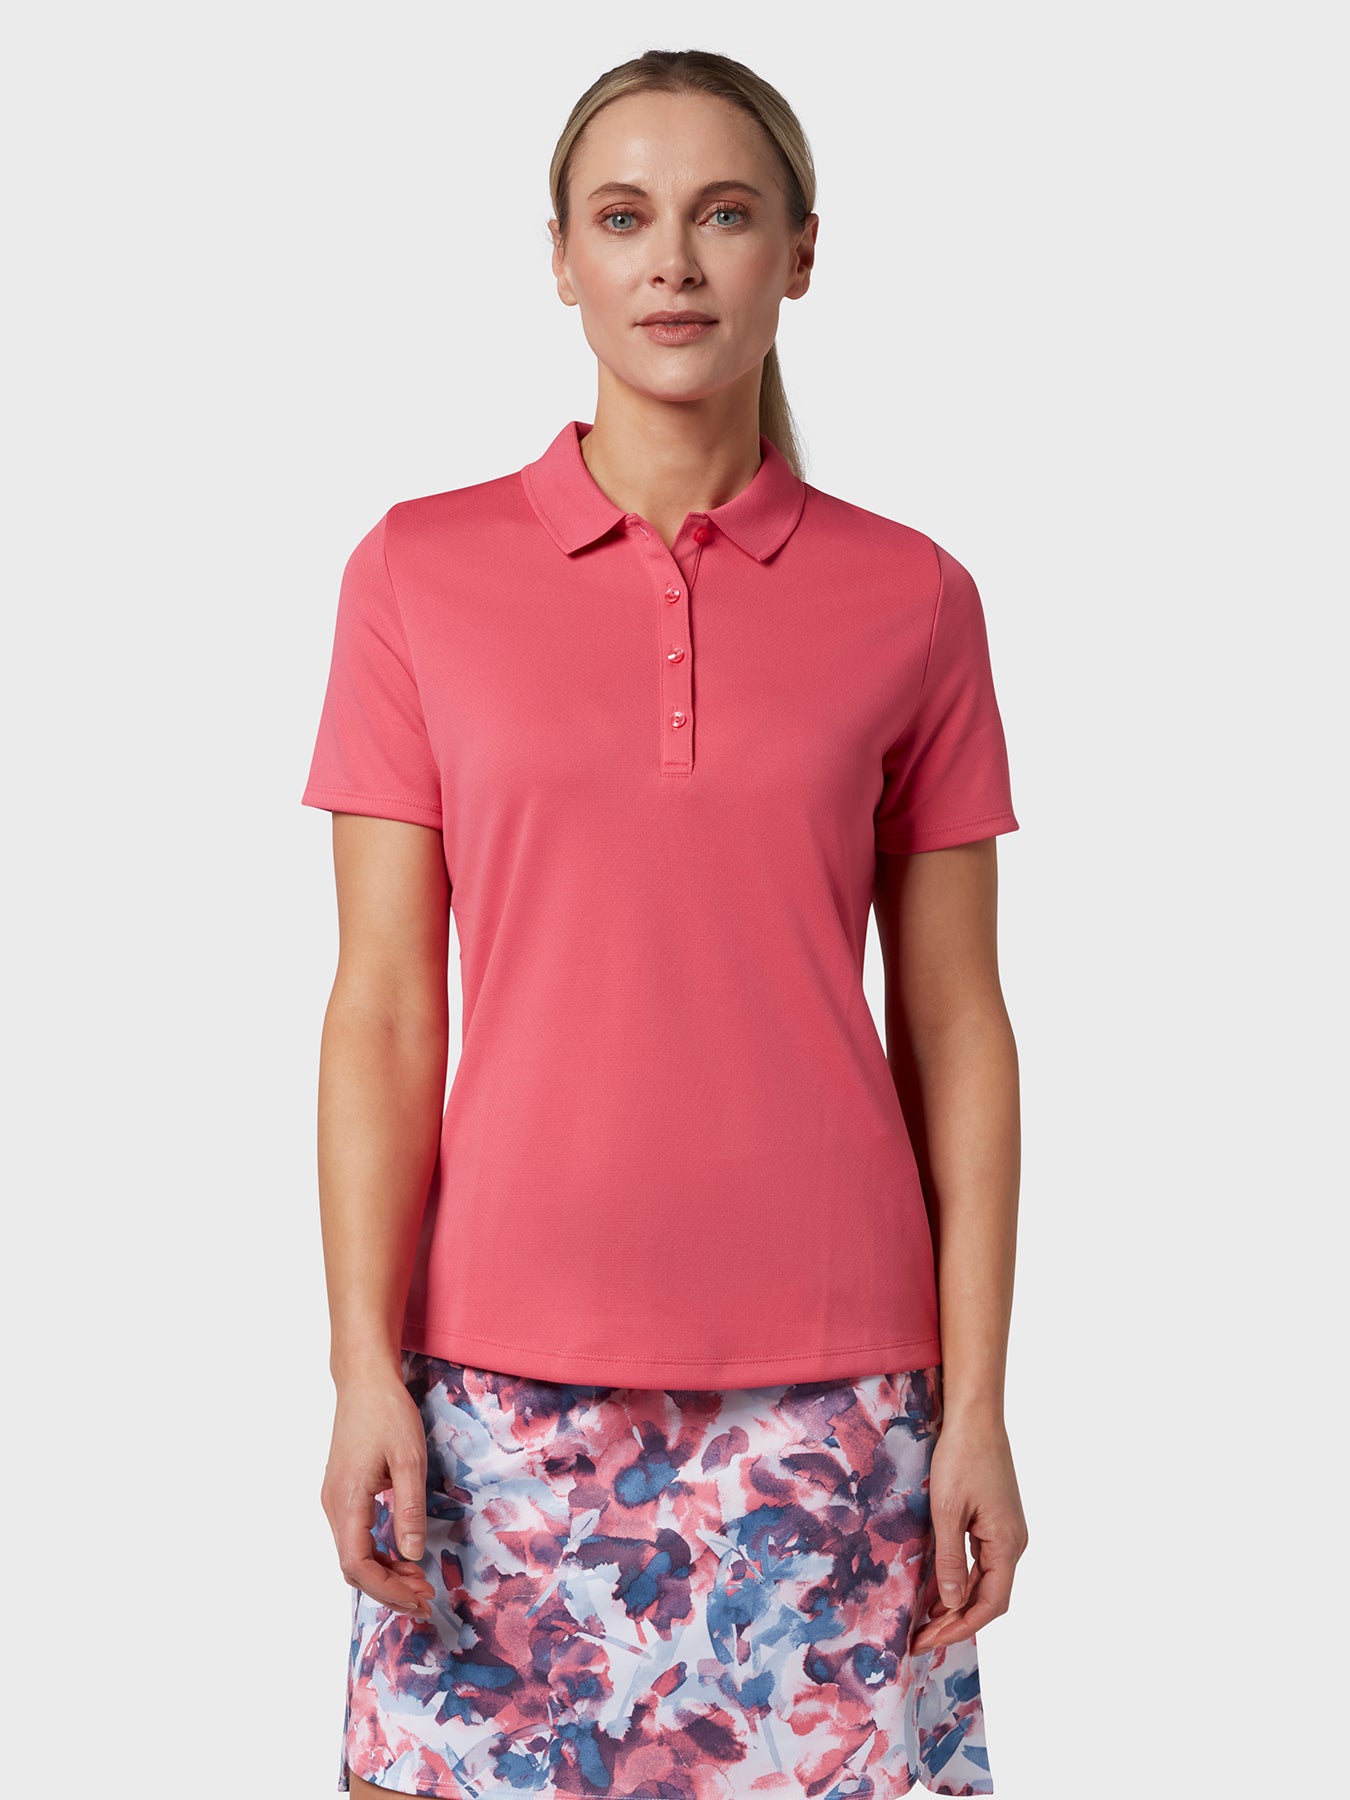 View Swing Tech Womens Polo In Fruit Dove Fruit Dove L information